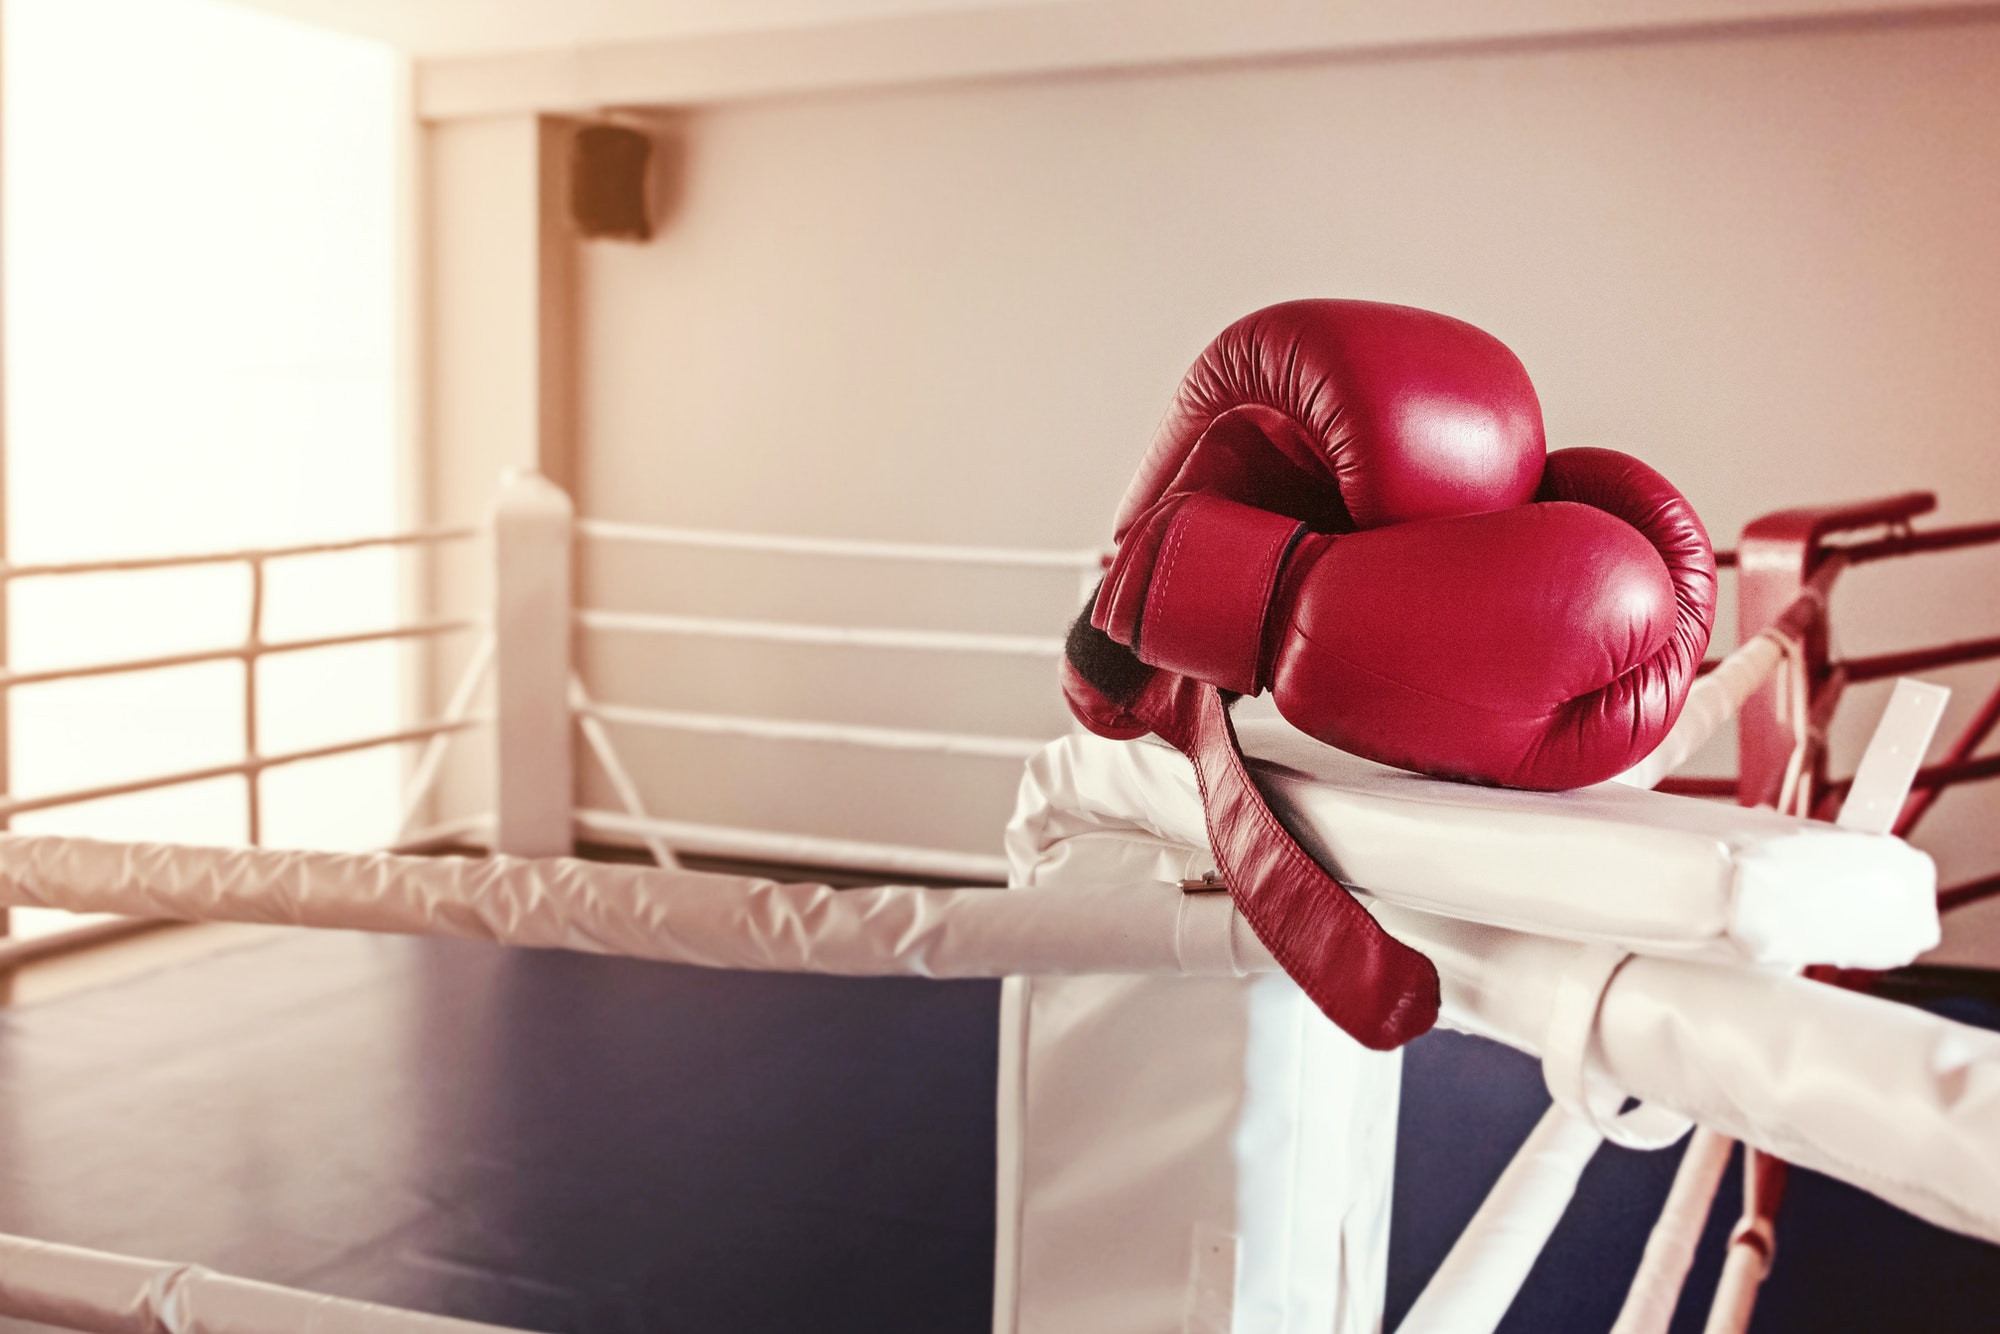 A pair of red boxing gloves hangs off ring